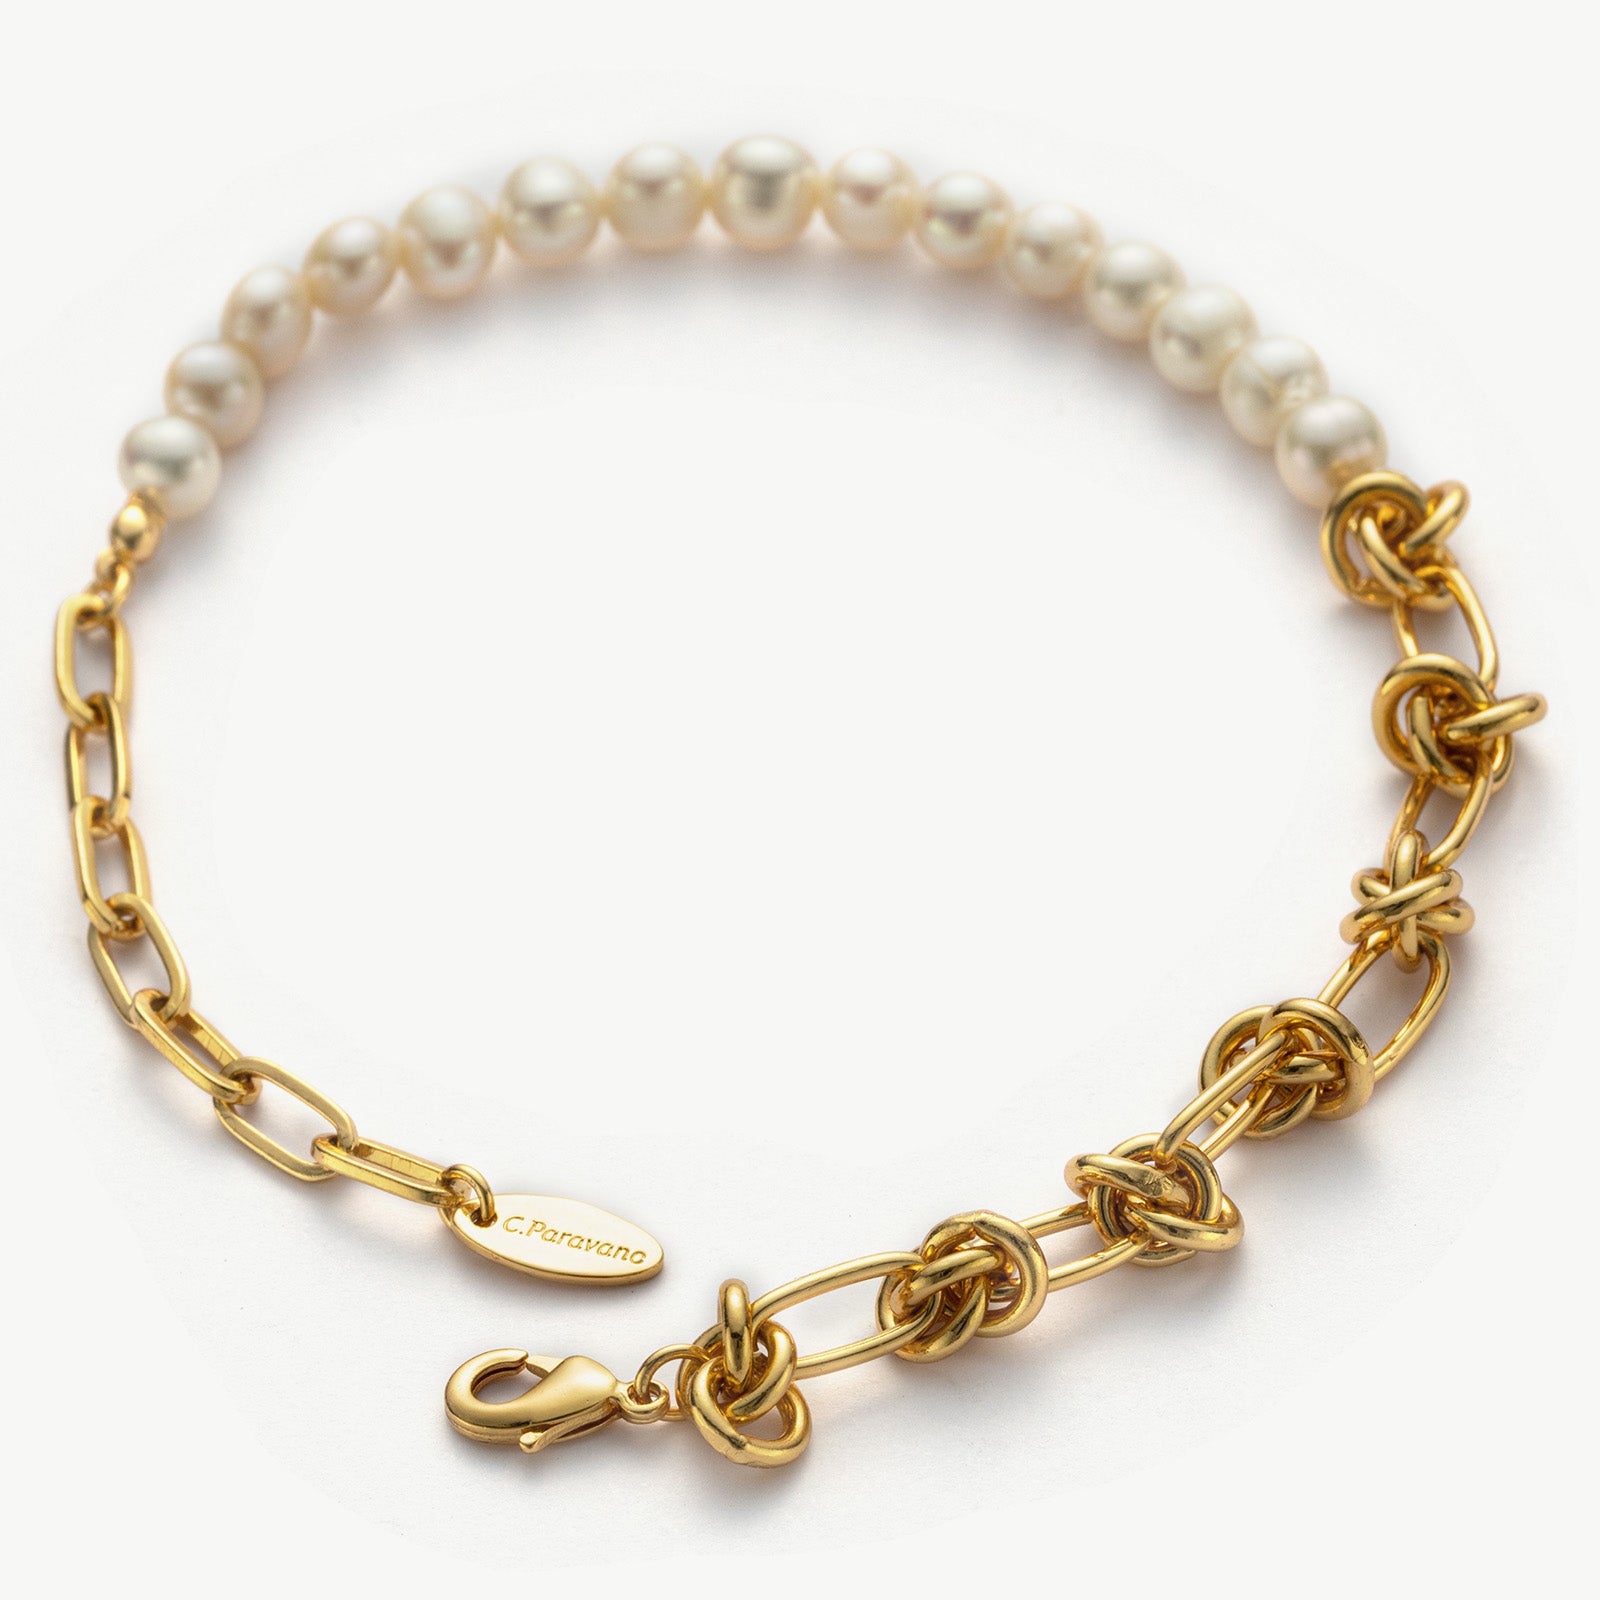 Molten Baroque Pearl Twisted Chain Bracelet, a fusion of modern design and classic pearls in gold, this bracelet brings a contemporary twist to traditional elegance, making it a versatile and chic accessory.